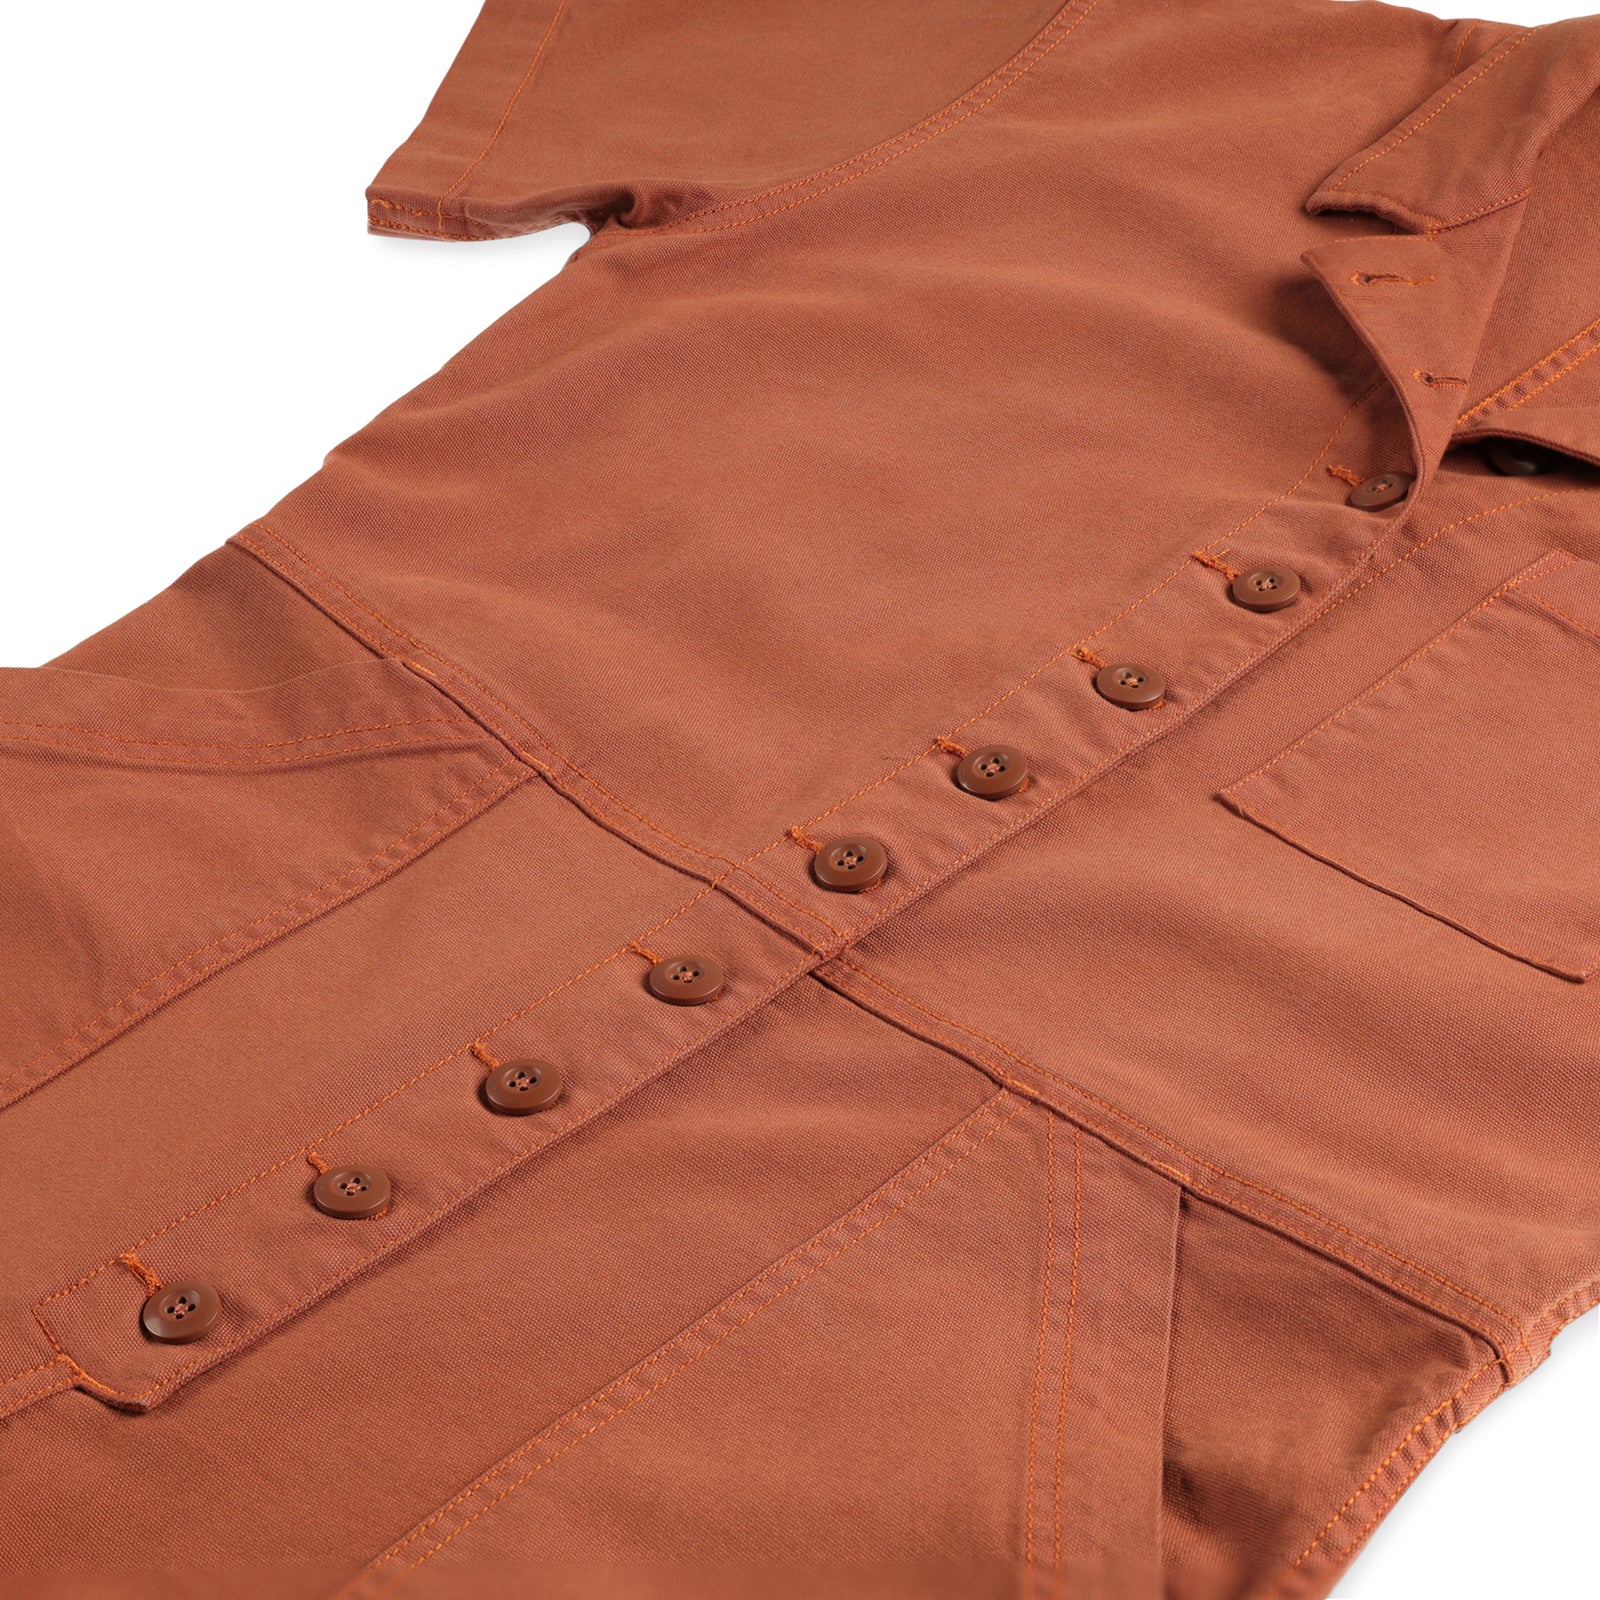 General detail shot of front buttons and pockets on Topo Designs Women's Dirt Coverall 100% organic cotton short sleeve jumpsuit in "brick" orange